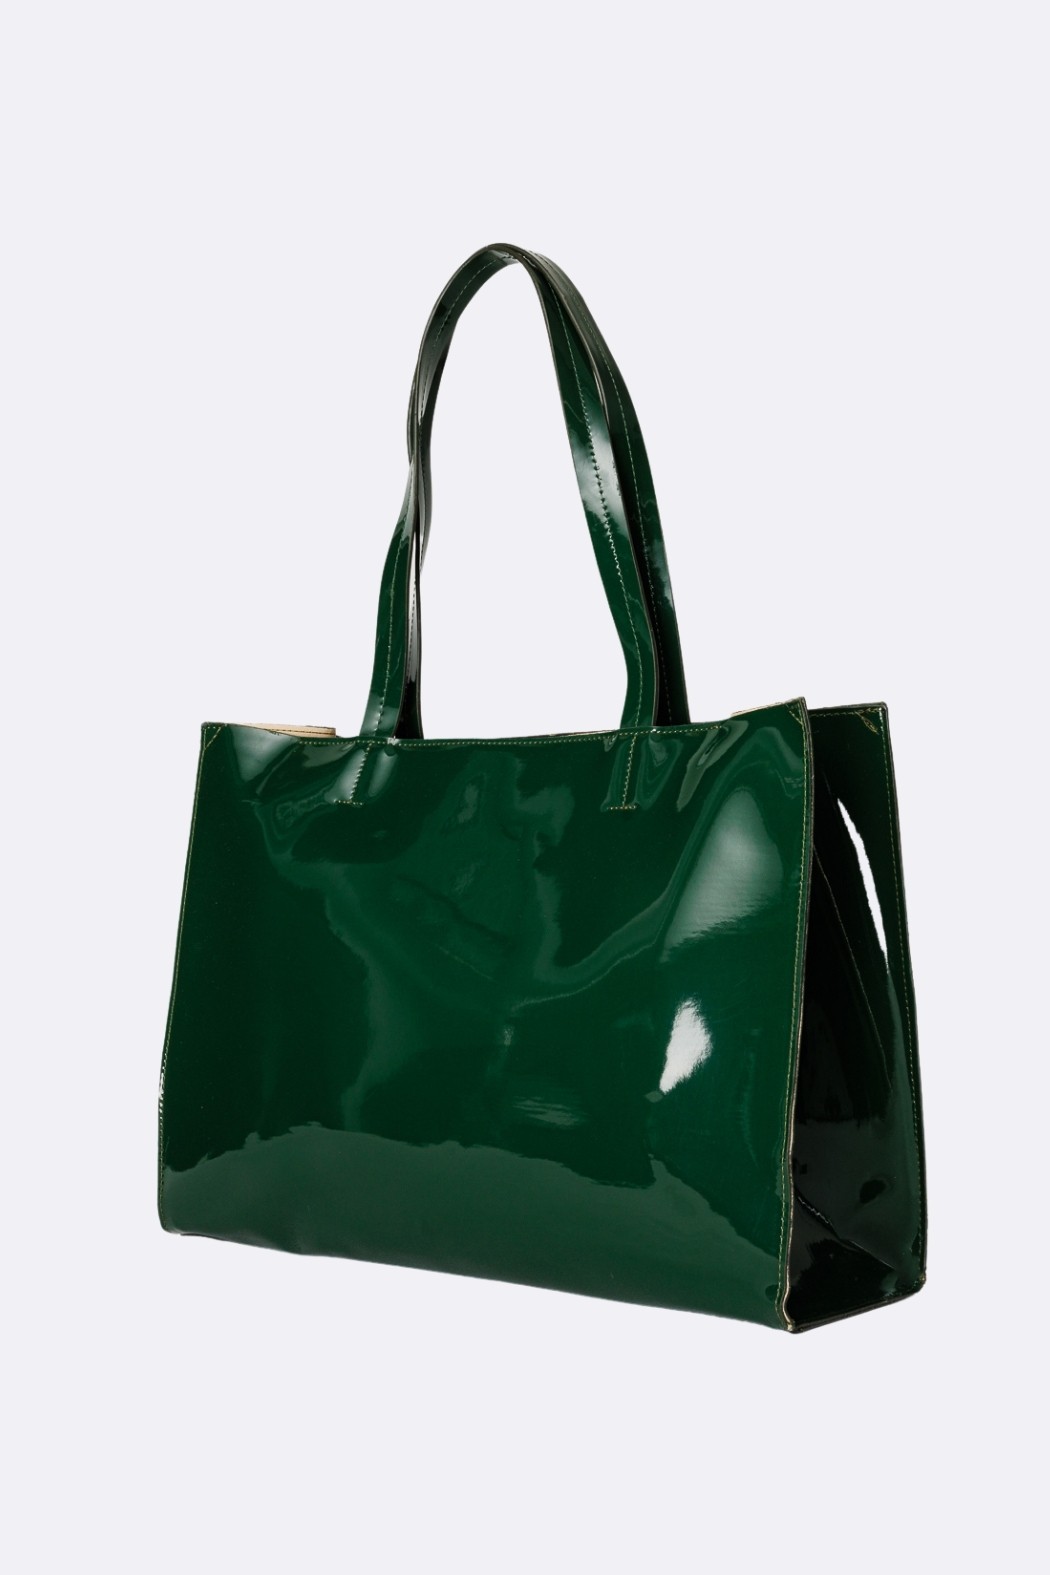 Lindy Patent Leather Bag - Benetton Green